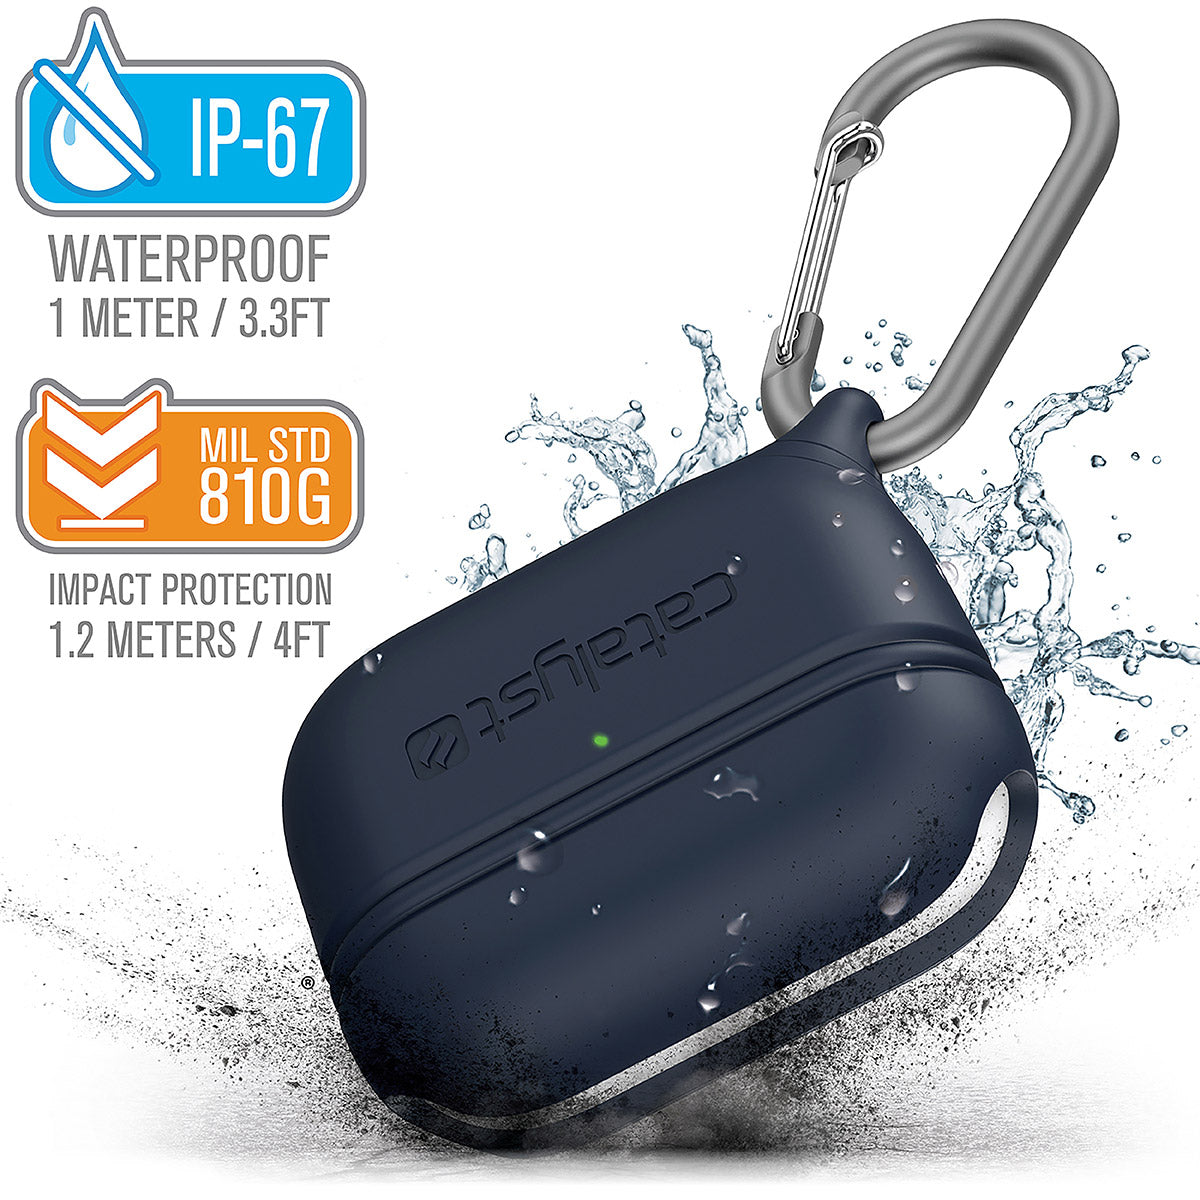 CATAPLAPDPRONAV | catalyst airpods pro gen 2 1 waterproof case carabiner special edition blue with cracked floor and splashes of water text reads ip-67 waterproof 1 meter 3.3ft mil std 810g impact protection 1.2 meters 4ft